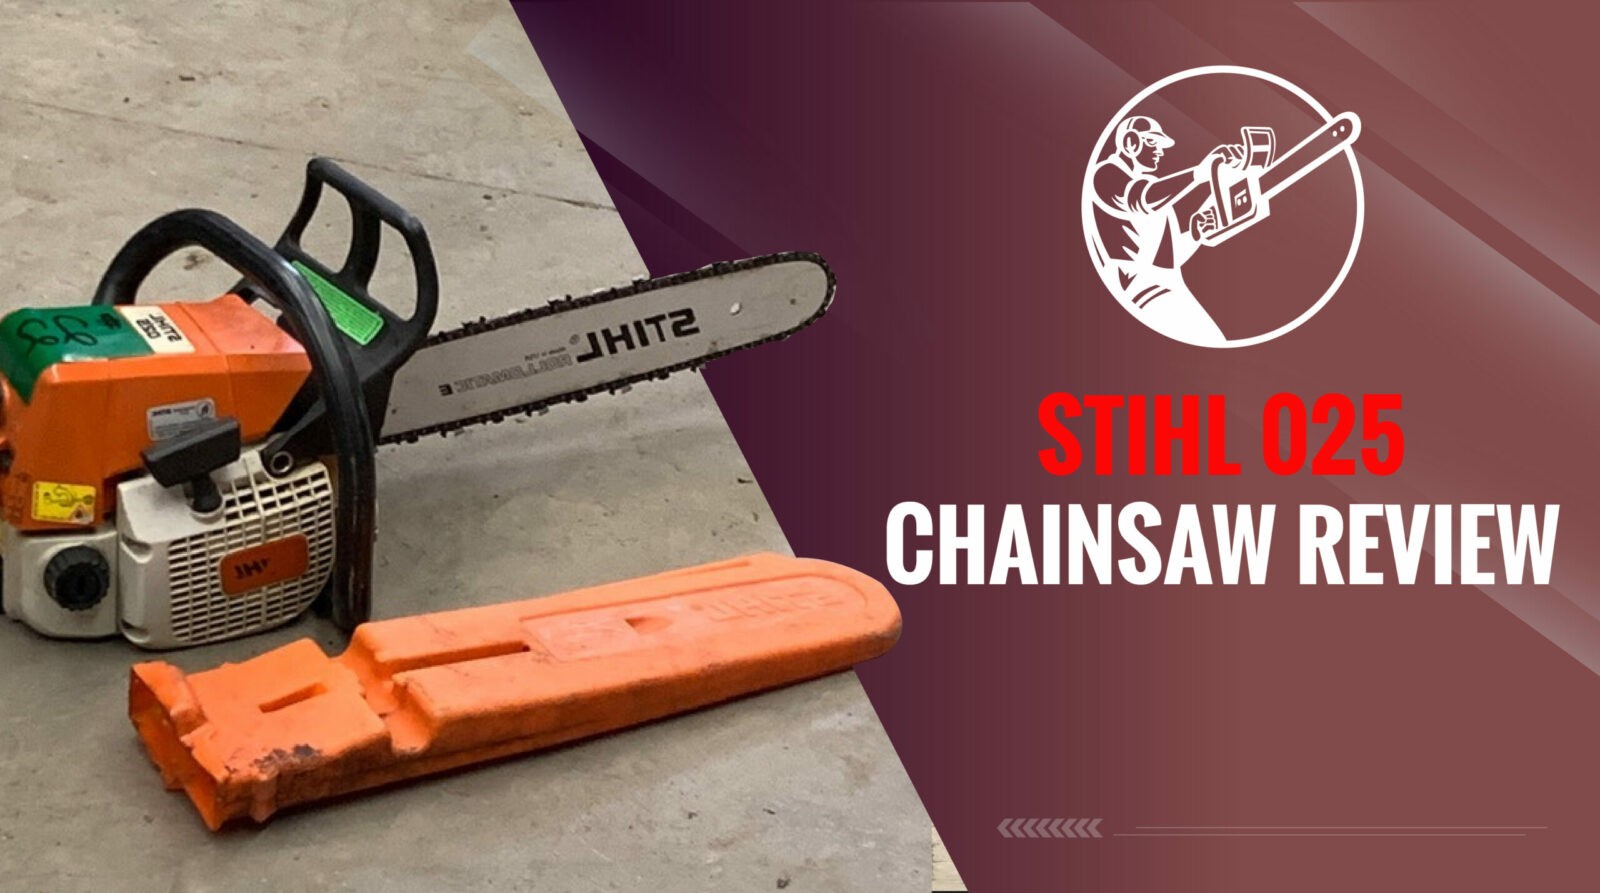 Stihl 025 Chainsaw Review – Is This A Good Saw?